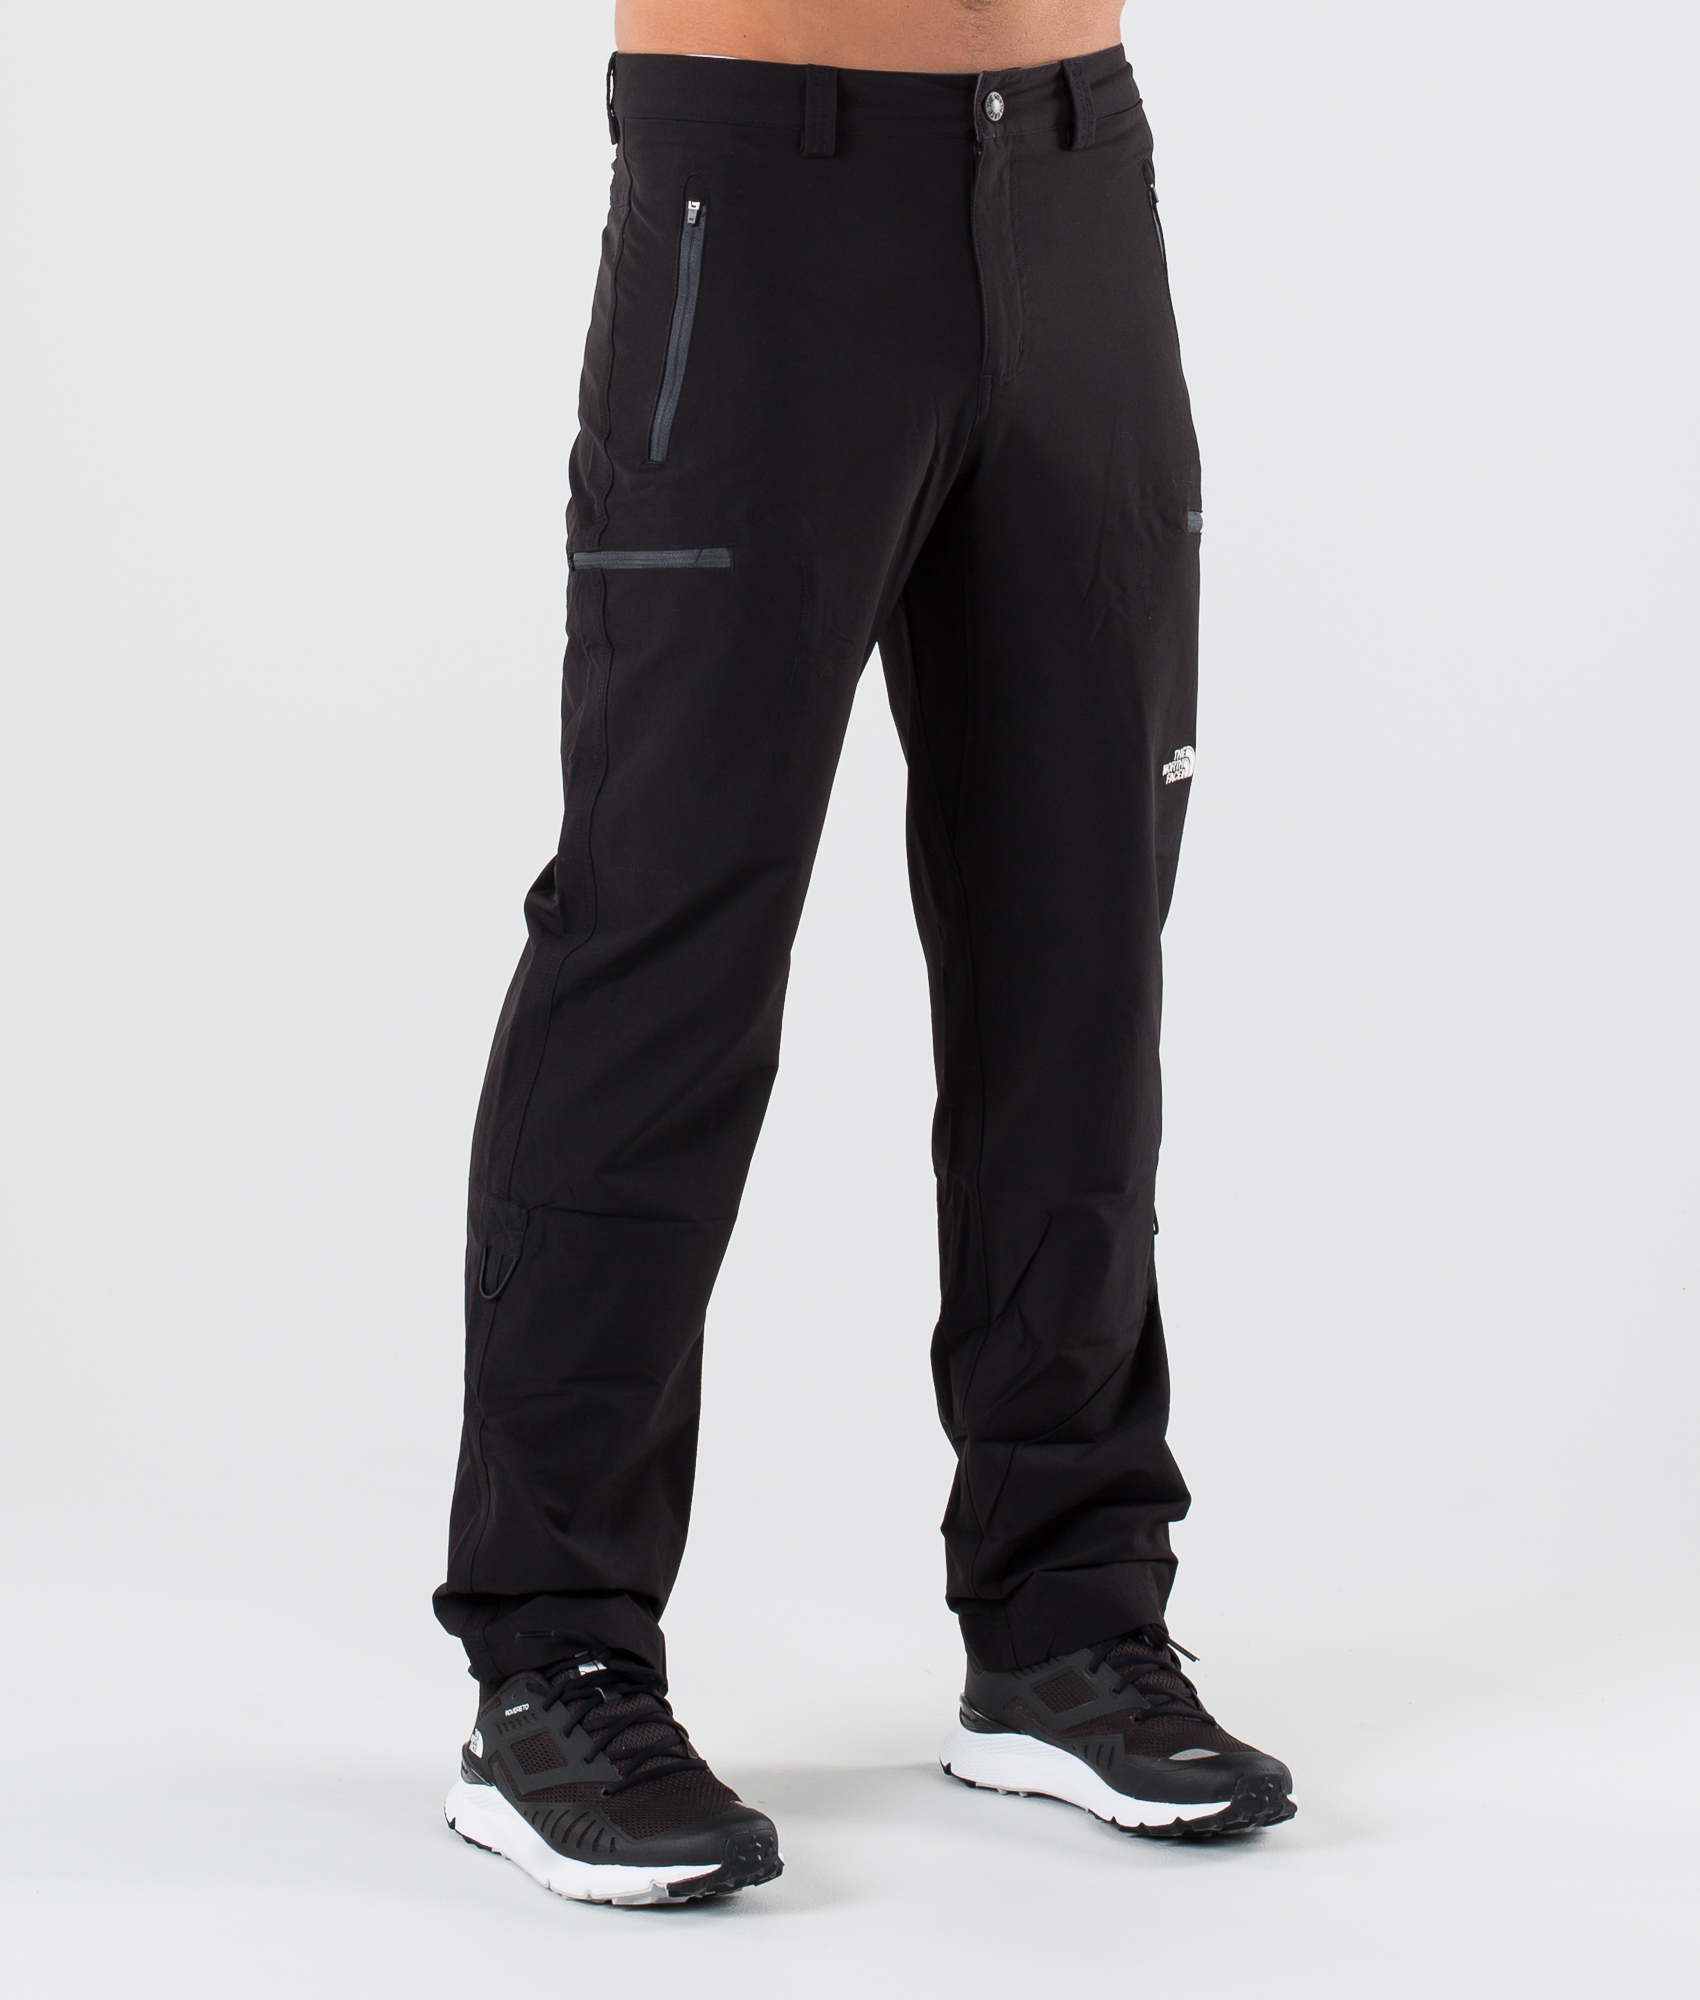 north face outdoor pants